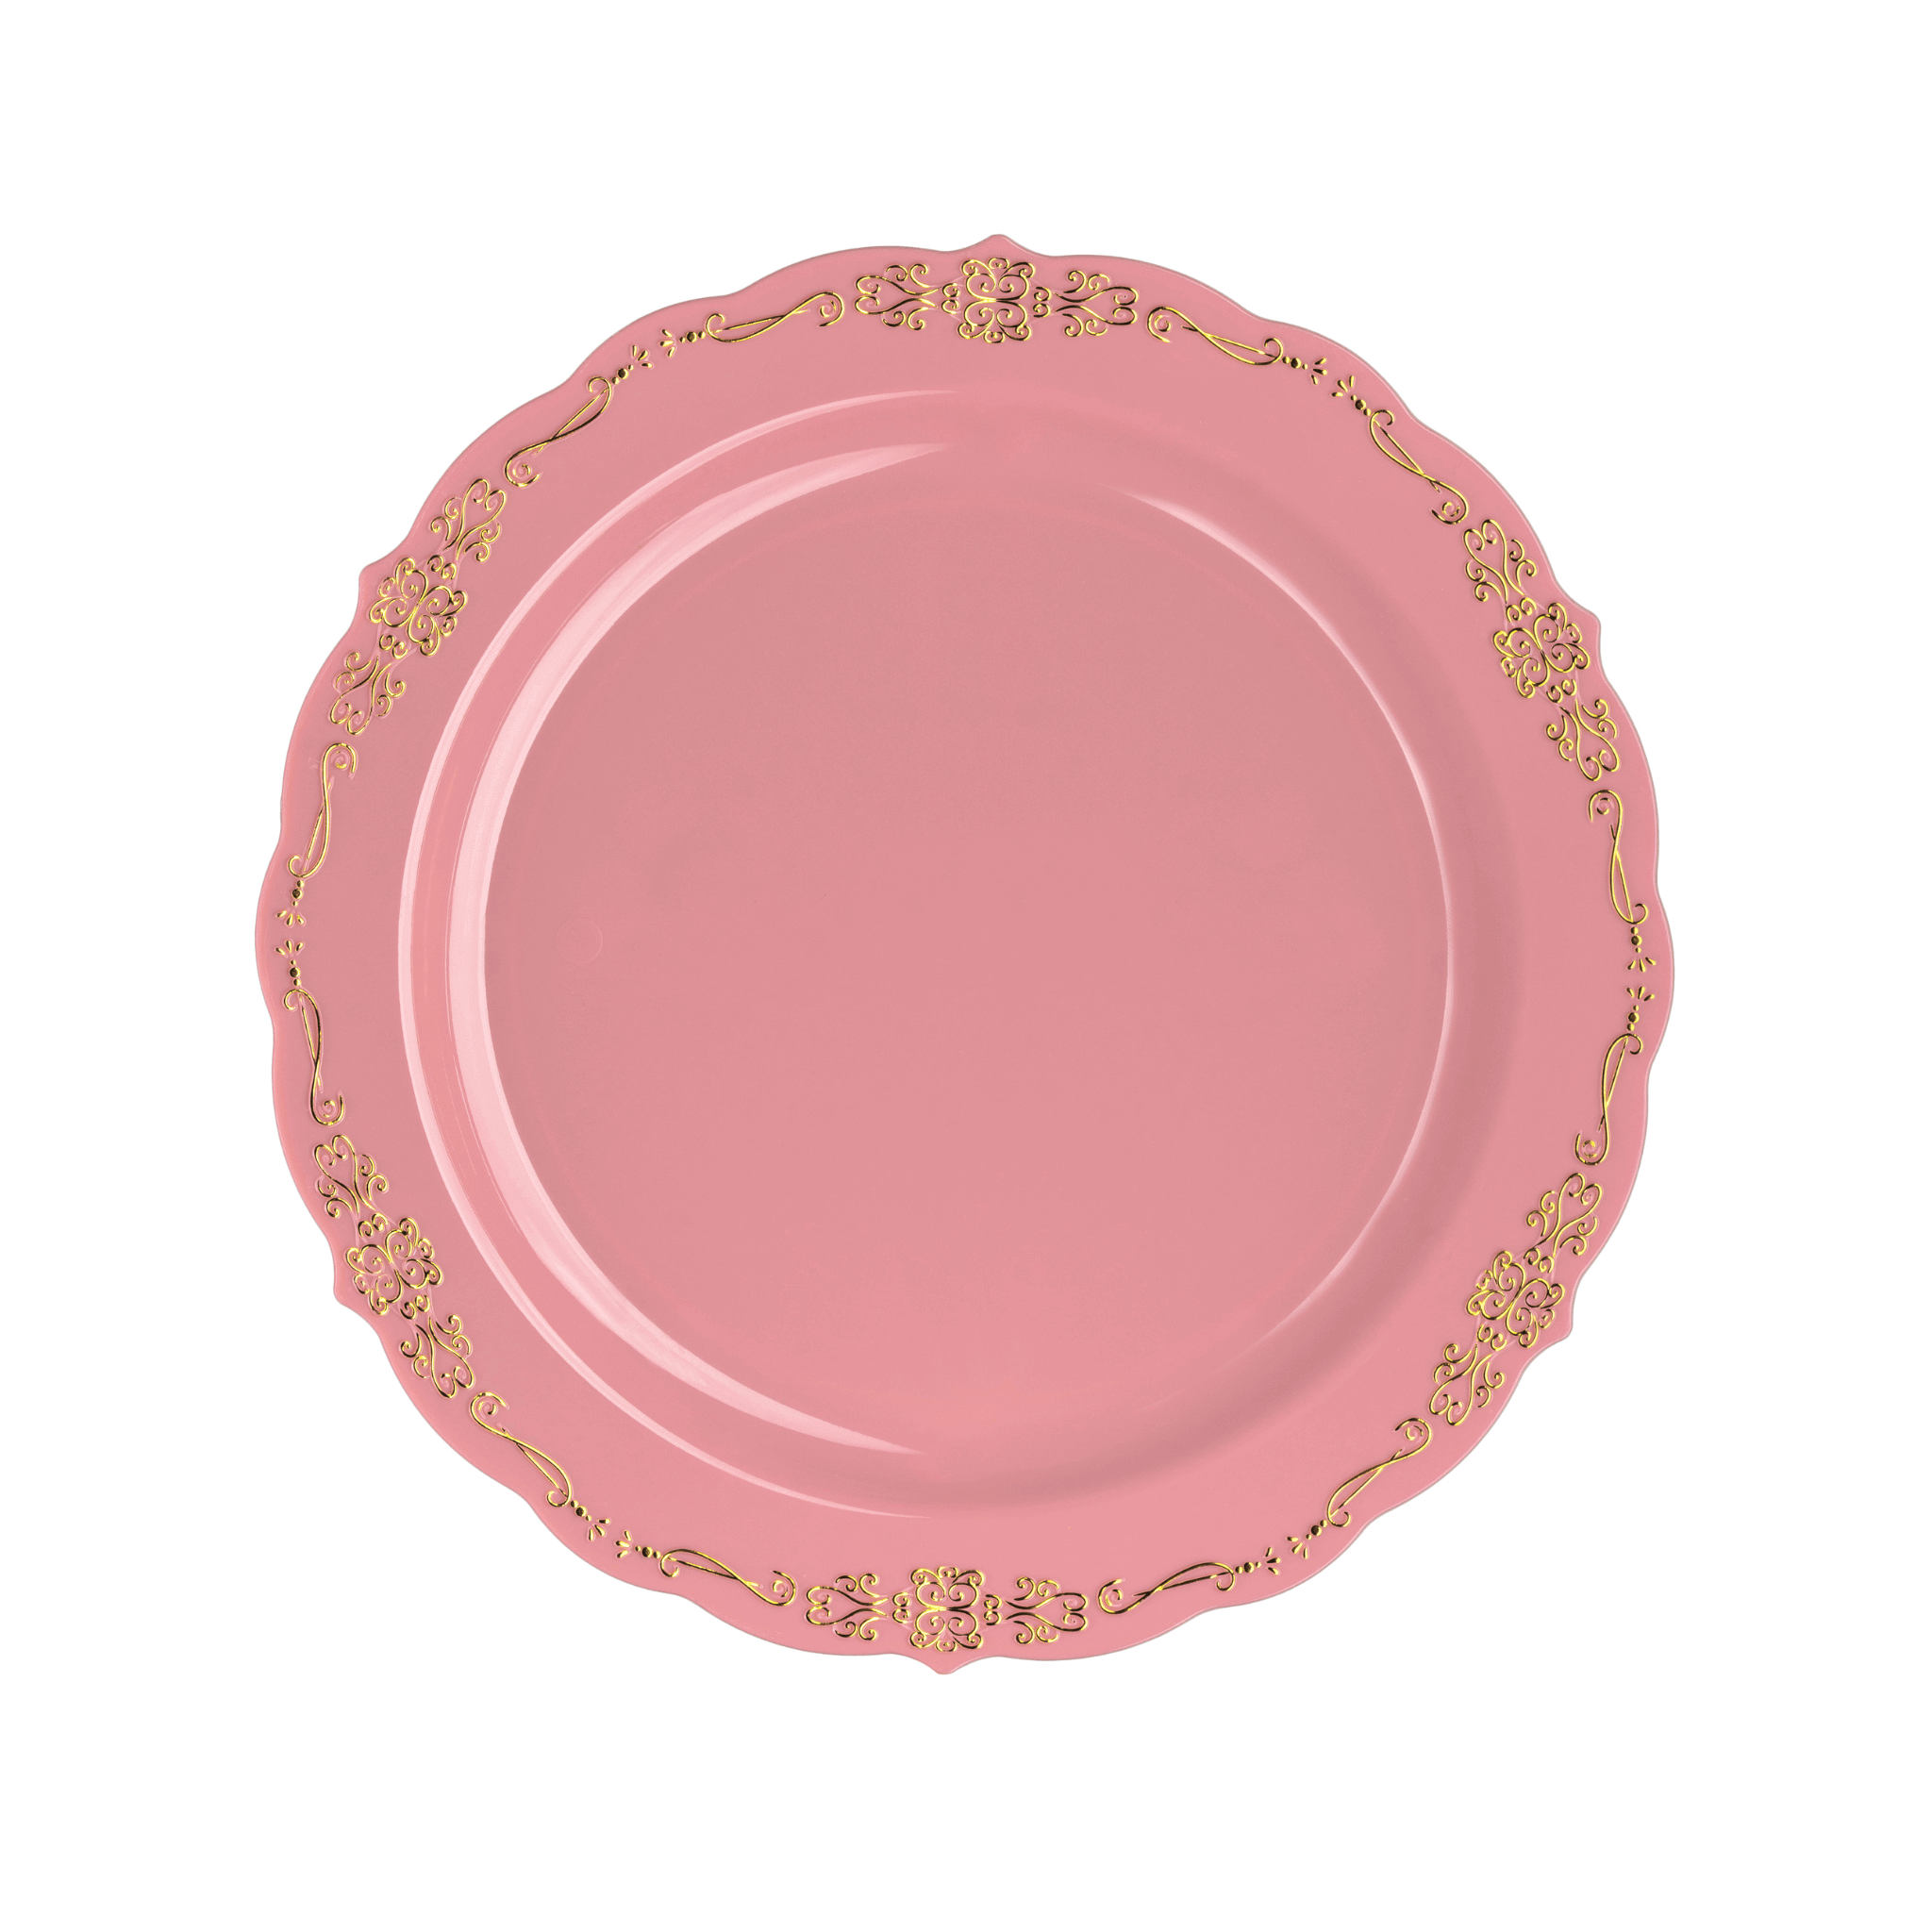 9" Coral / Gold Victorian Design Plastic Plates (120 Count) - Yom Tov Settings